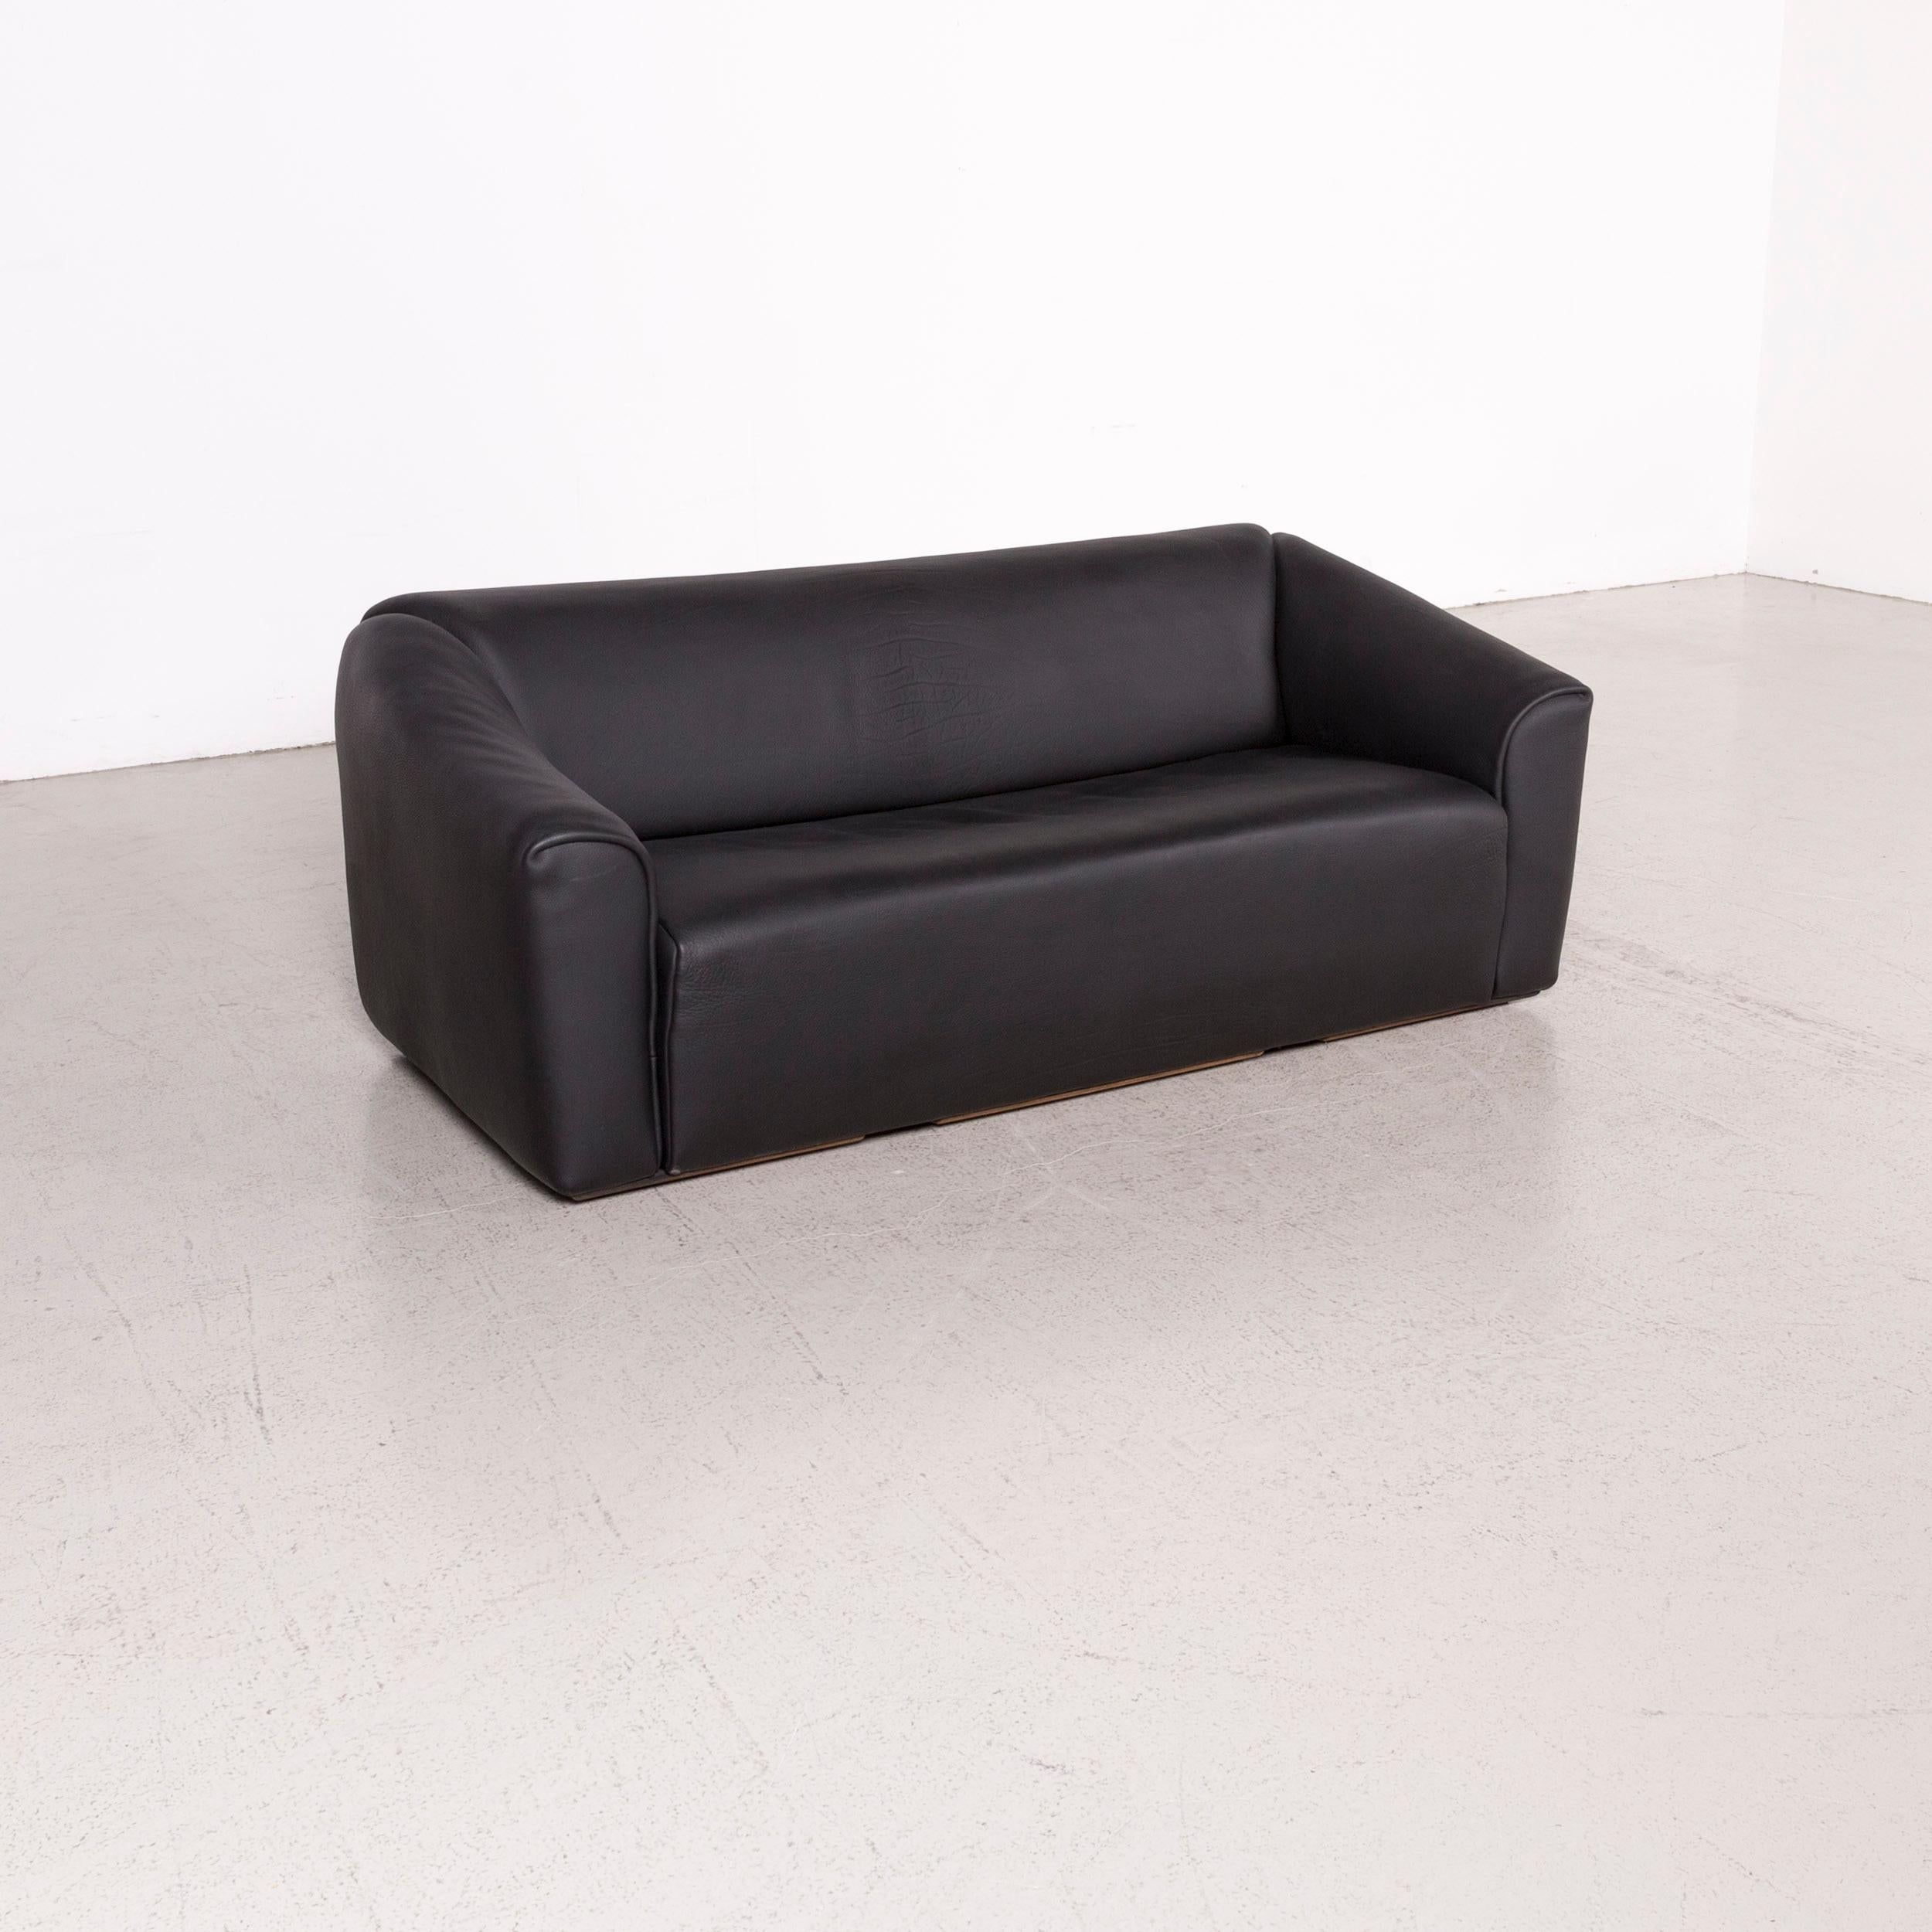 We bring to you a de Sede ds 47 designer leather sofa black two-seat real leather couch.

Product measurements in centimeters:

Depth 90
Width 180
Height 70
Seat-height 40
Rest-height 60
Seat-depth 50
Seat-width 135
Back-height 40.
 